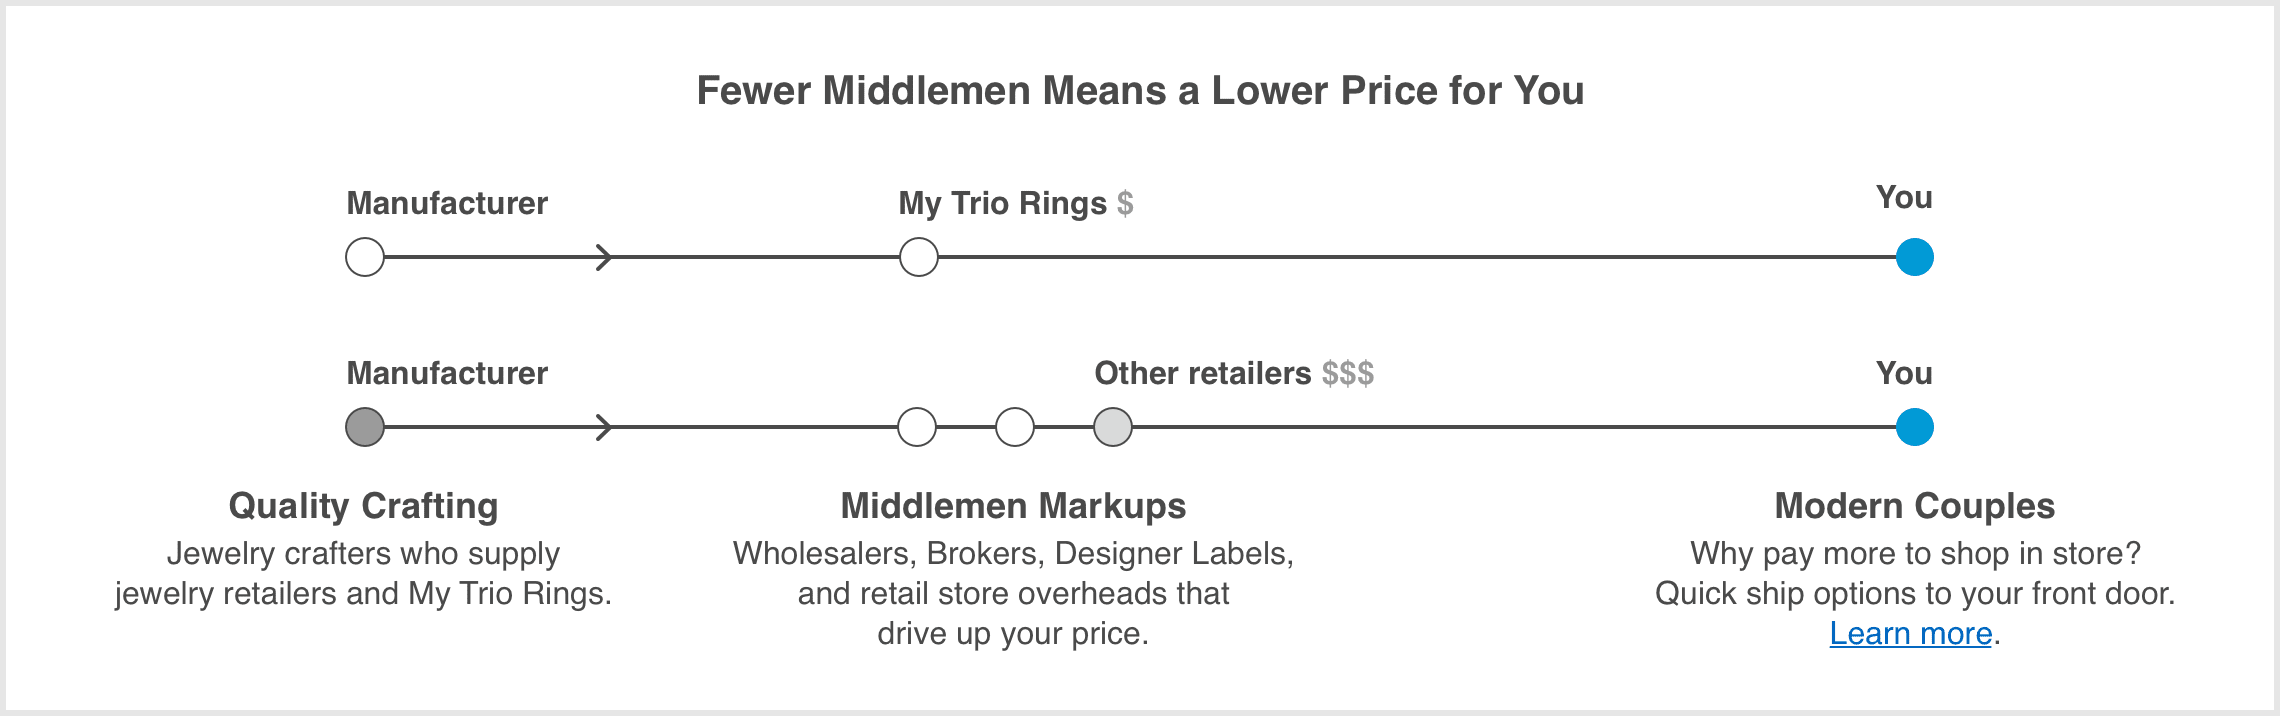 Fewer middlemen means a lower price for you.